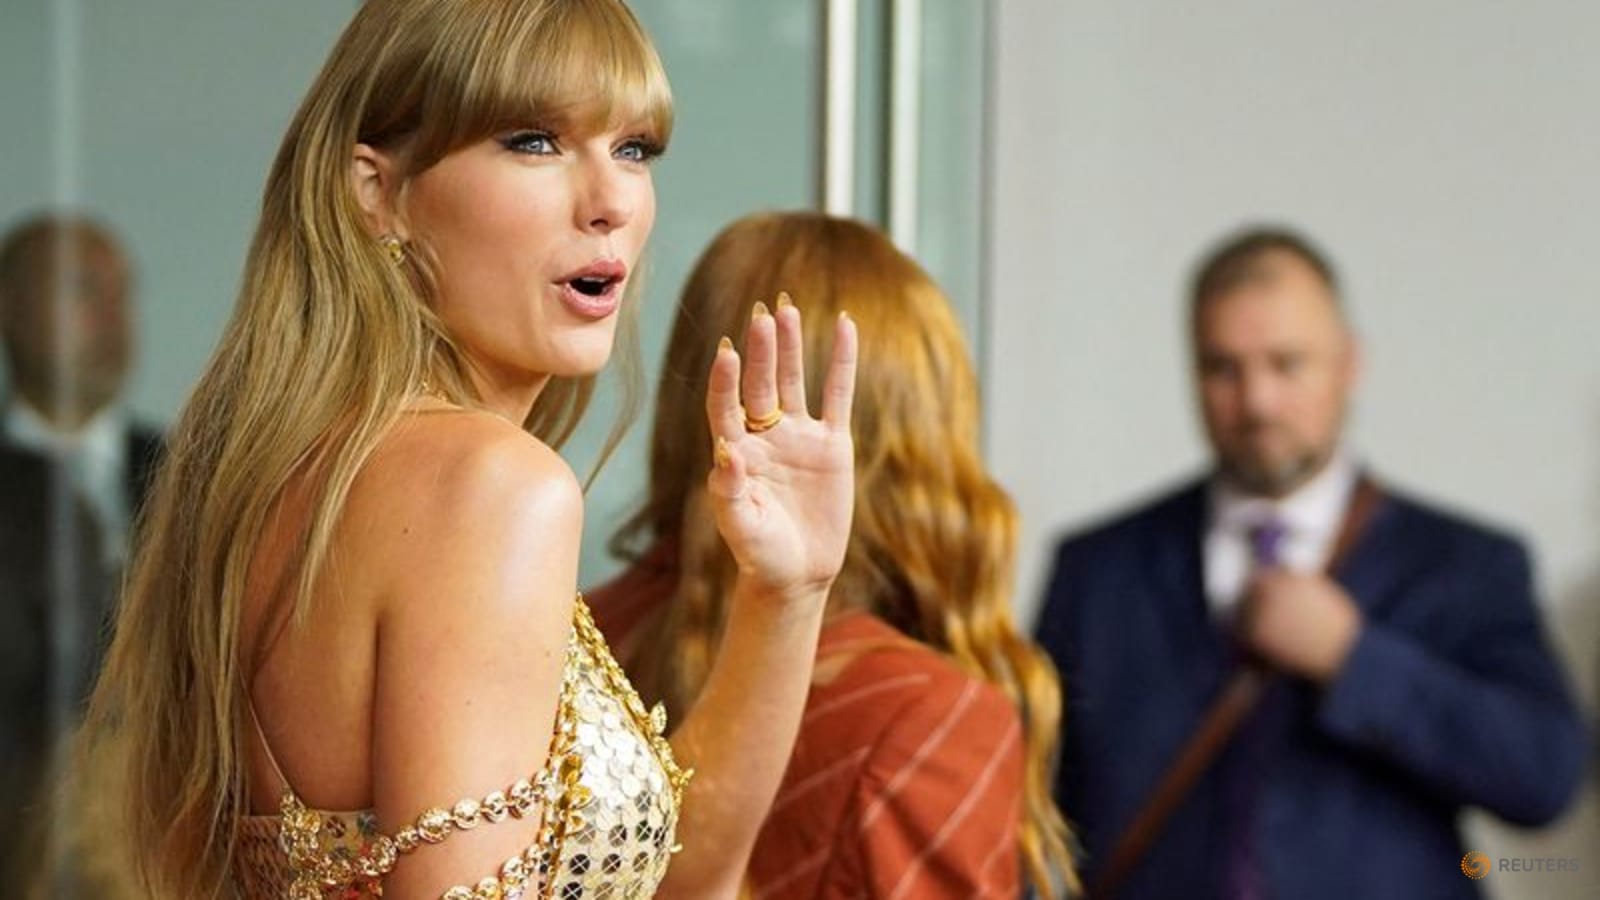 live-nation-says-taylor-swift-fans-can't-sue-over-ticket-debacle